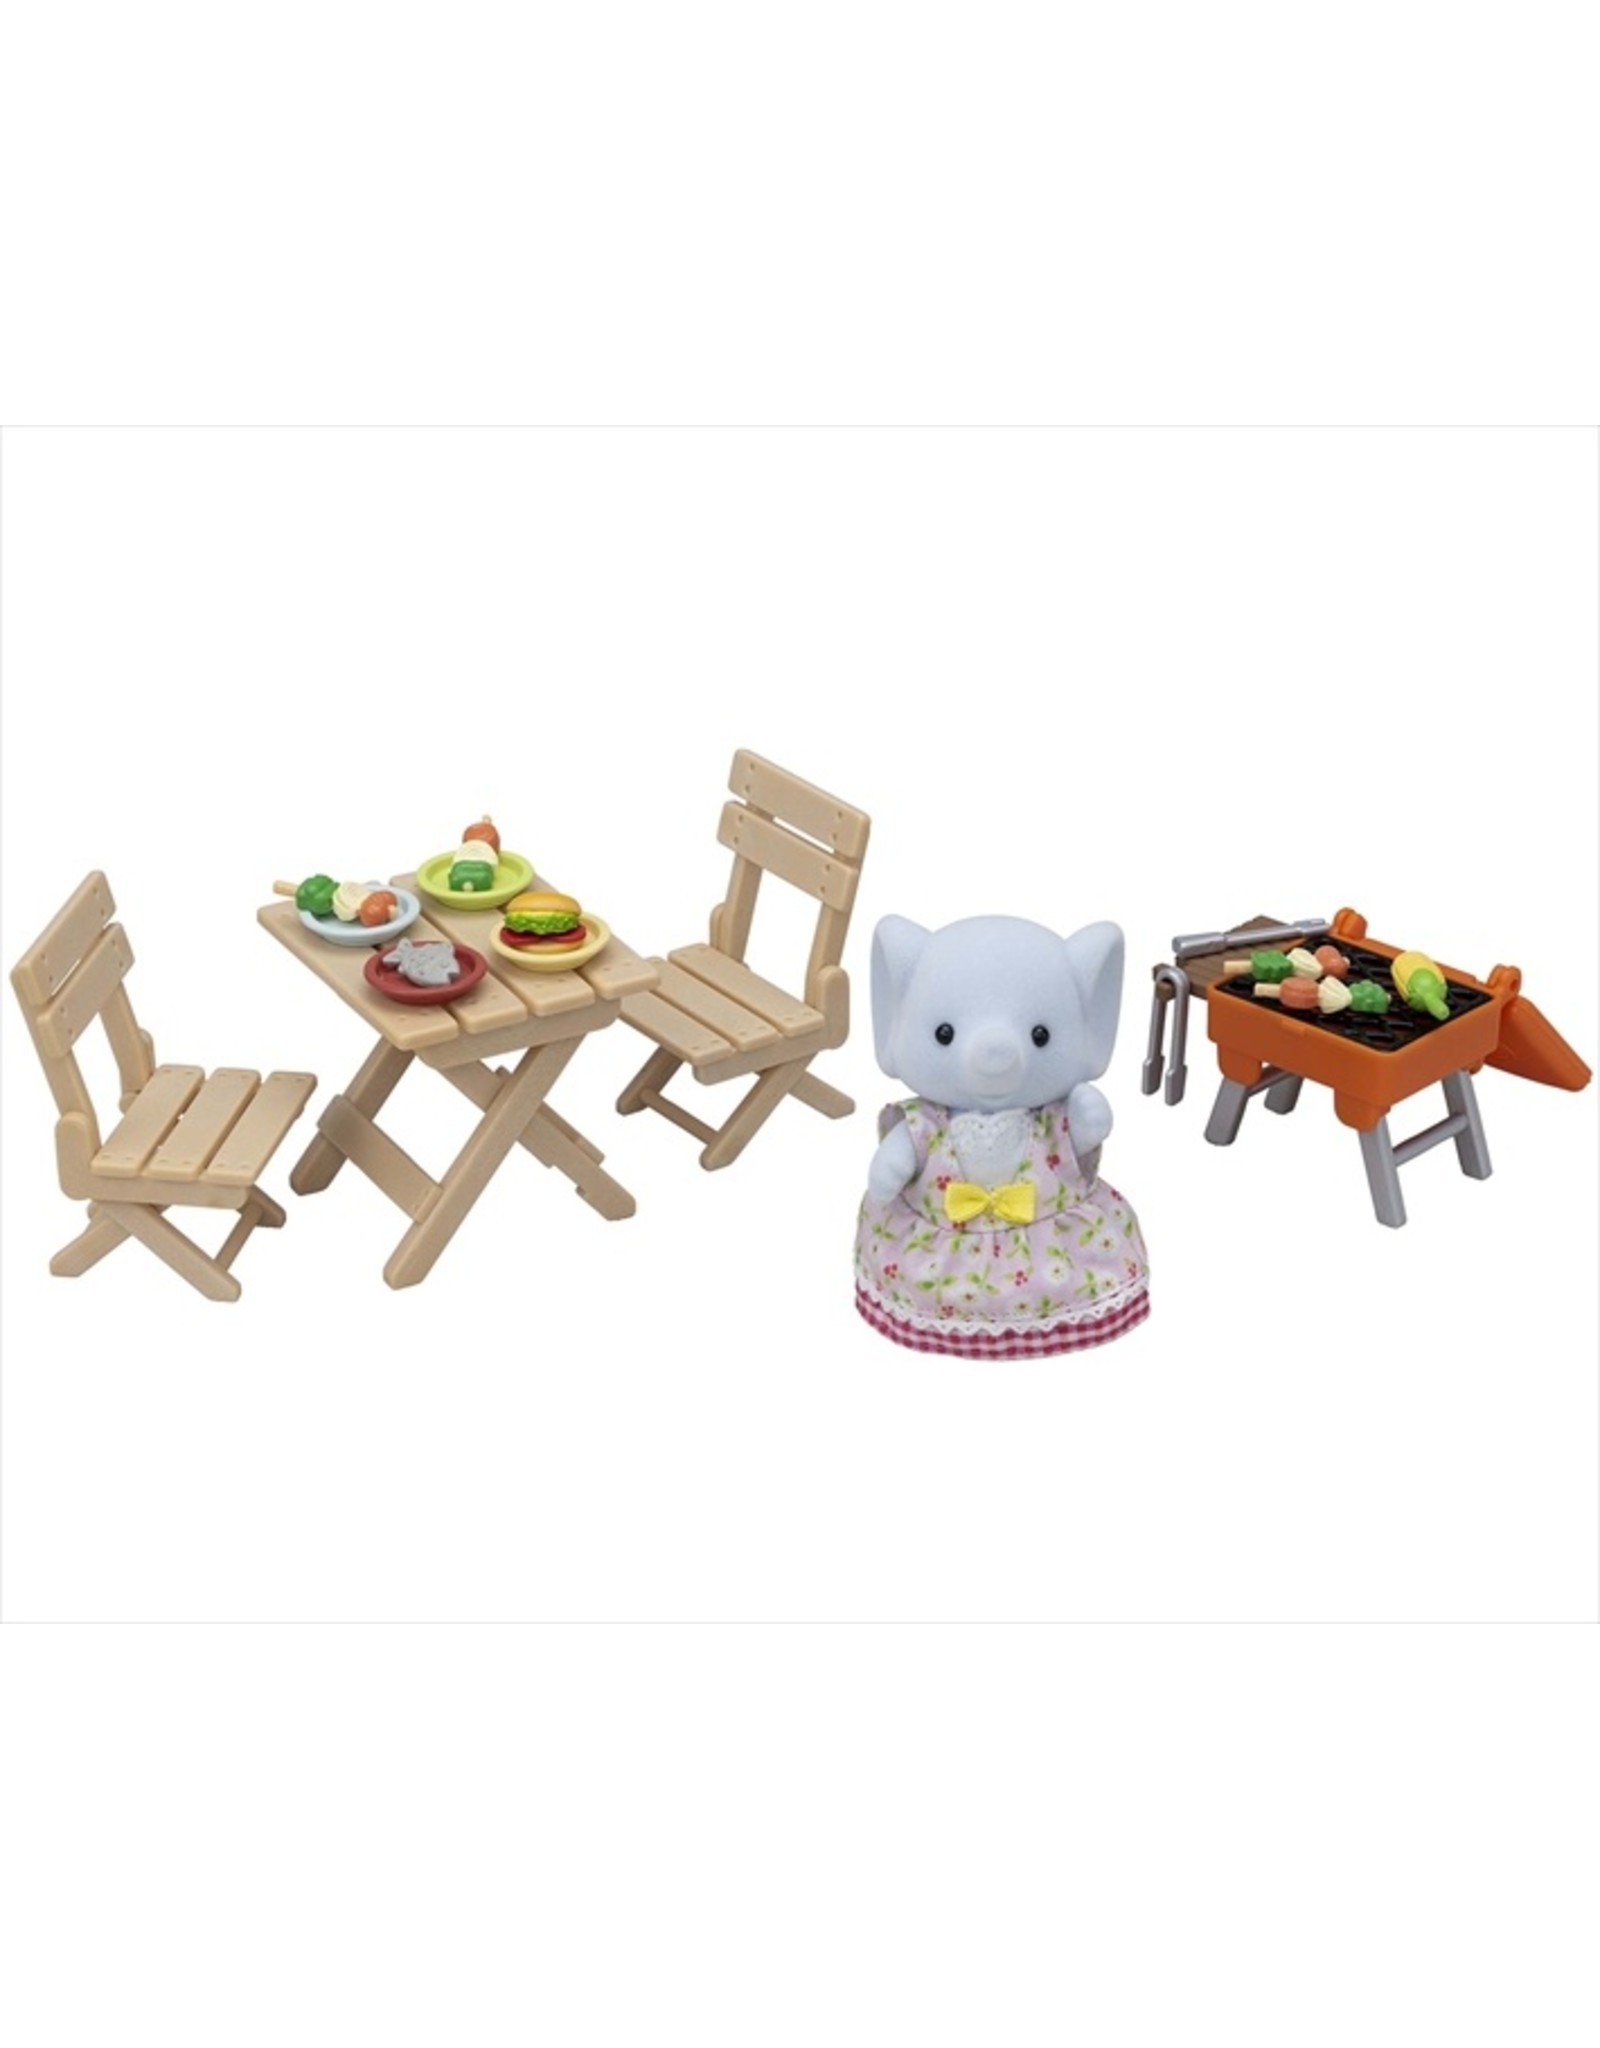 Calico Critters Calico Critter BBQ Picnic Set